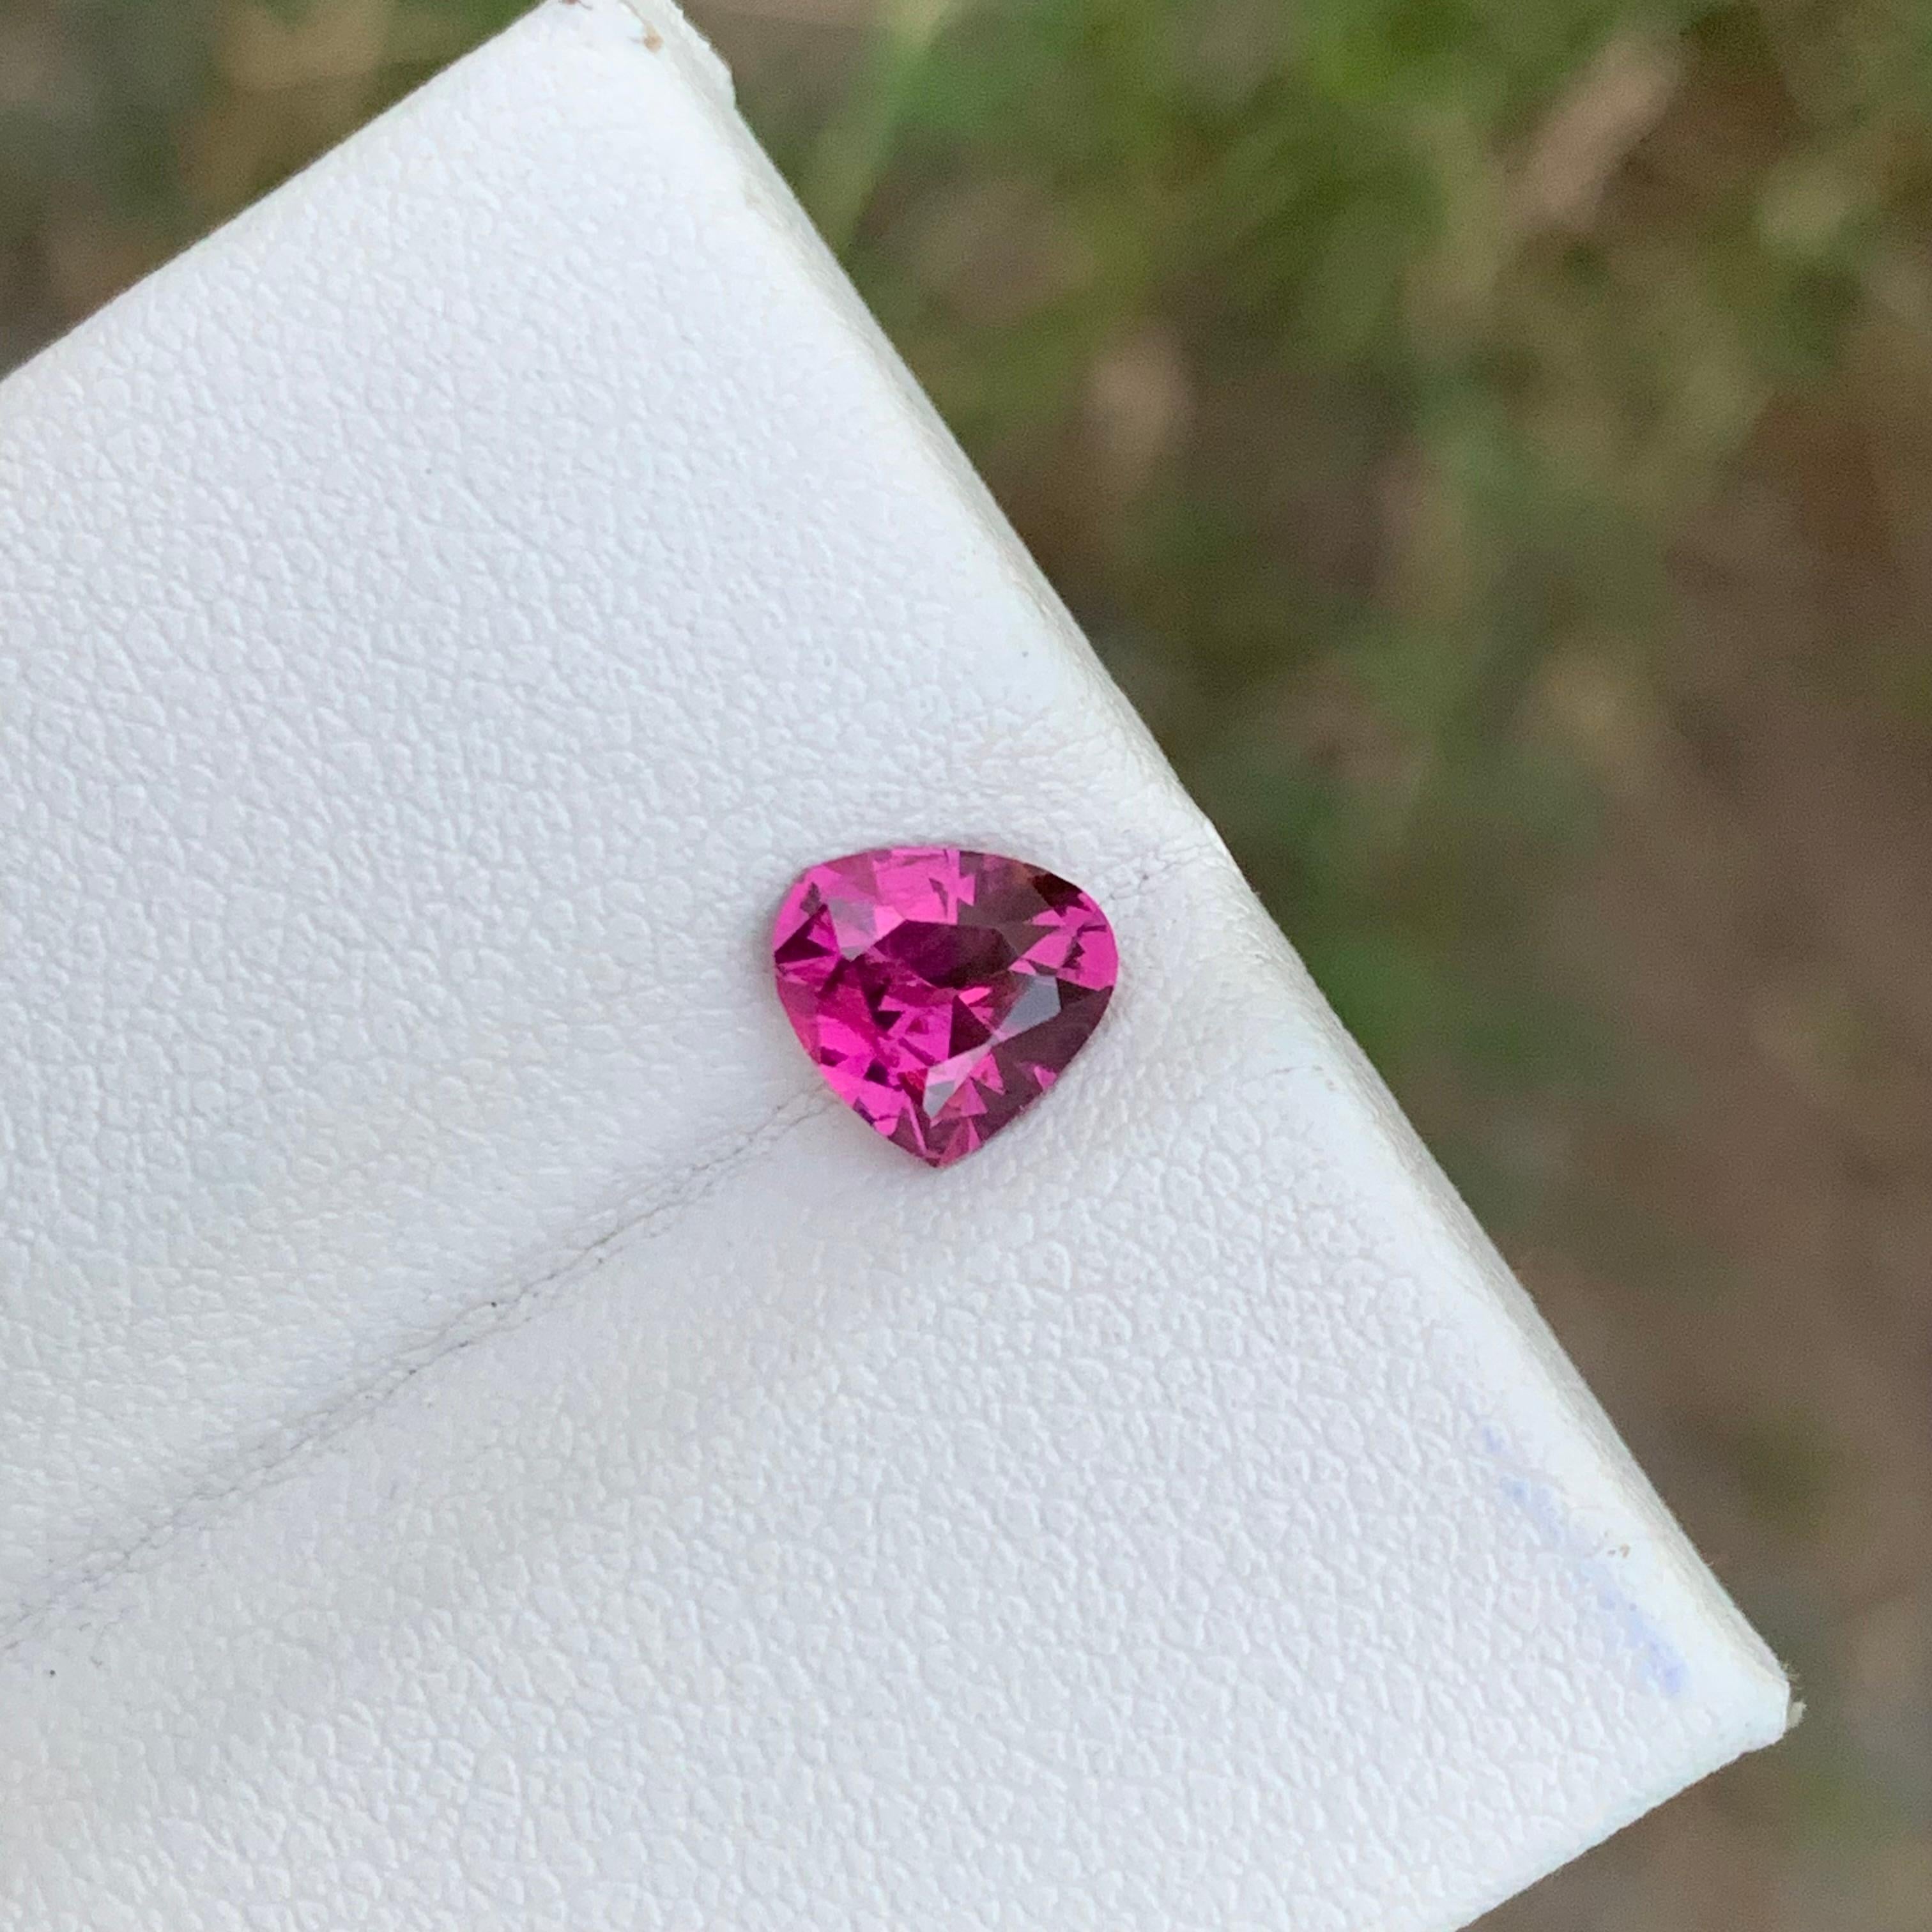 Loose Rhodolite Garneg
Weight: 1.05 Carats 
Dimension: 6.4x6.9x3.6 Mm
Origin: Tanzania 
Shape: Heart
Treatment: Non
Rhodolite garnet, a gem of exceptional beauty and versatility, is a variety of garnet cherished for its captivating rose or